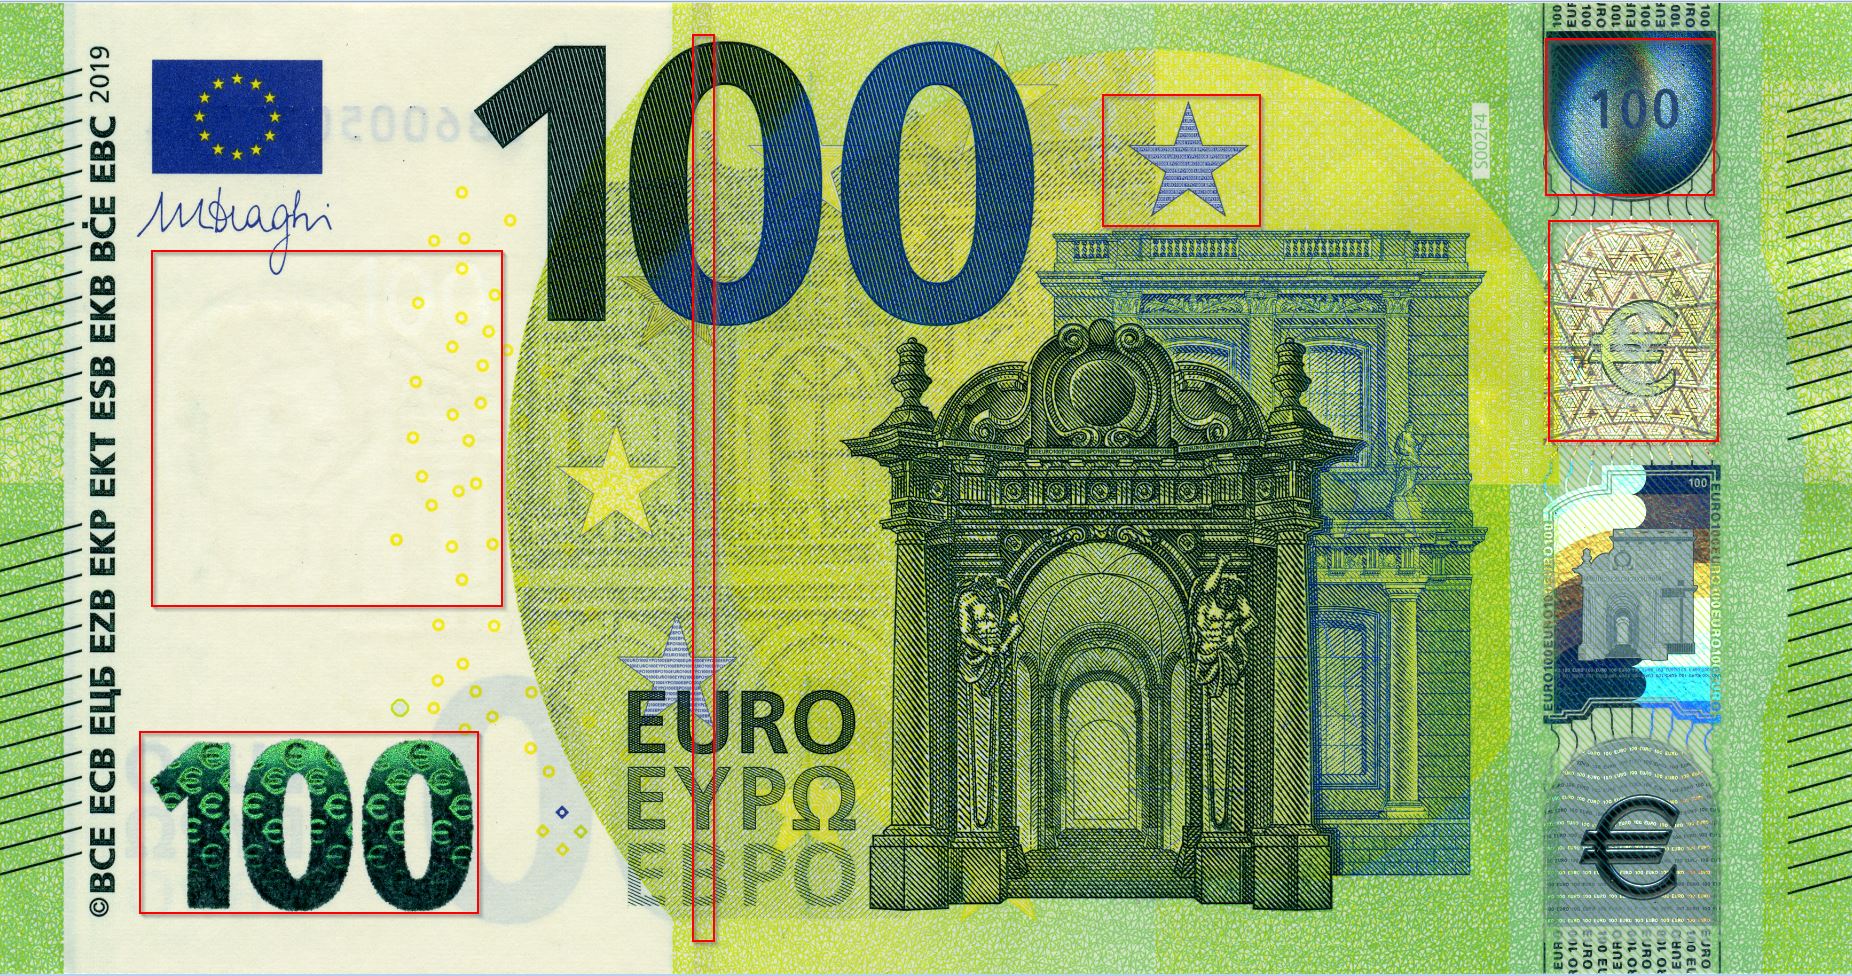 100 euro banknote, Europa series - front side